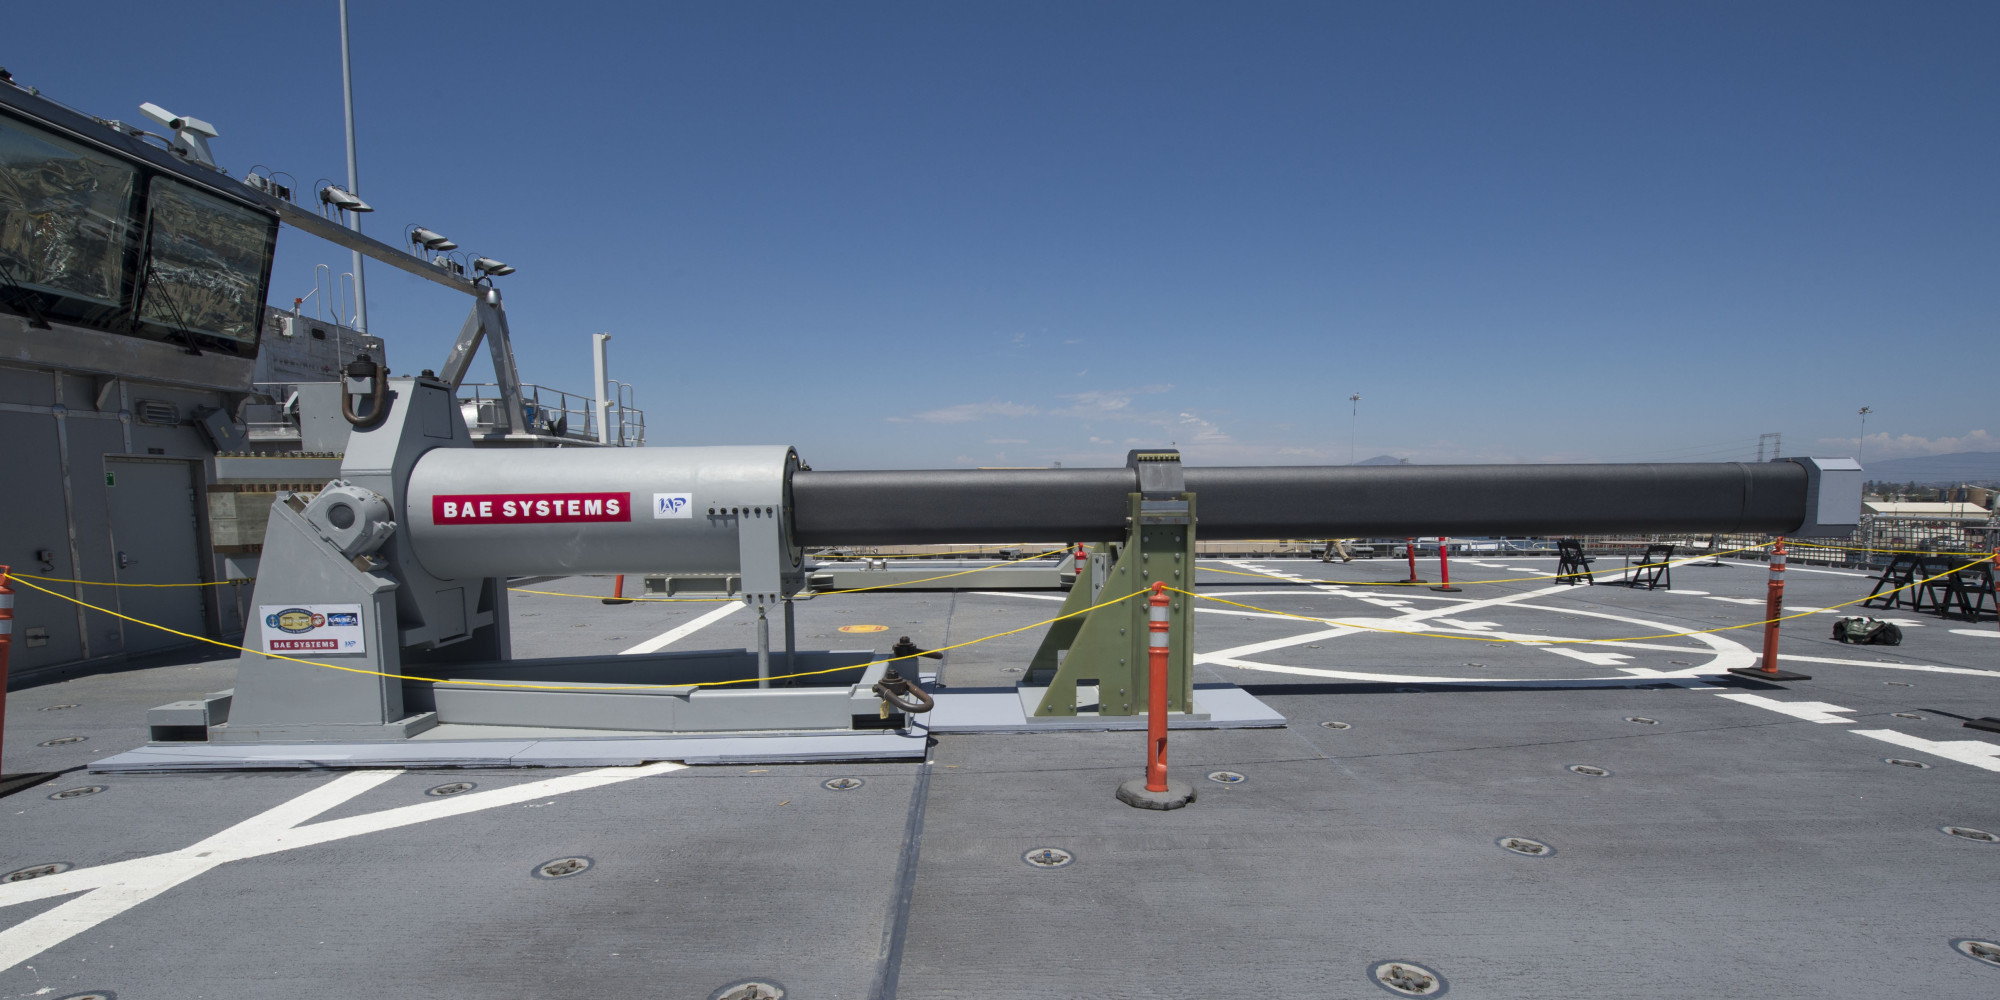 140708-N-ZK869-010 SAN DIEGO (July 8, 2014) One of the two electromagnetic railgun prototypes on display aboard the joint high speed vessel USS Millinocket (JHSV 3) in port at Naval Base San Diego. The railguns are being displayed in San Diego as part of the Electromagnetic Launch Symposium, which brought together representatives from the U.S. and allied navies, industry and academia to discuss directed energy technologies. (U.S. Navy photo by Mass Communication Specialist 2nd Class Kristopher Kirsop/Released)